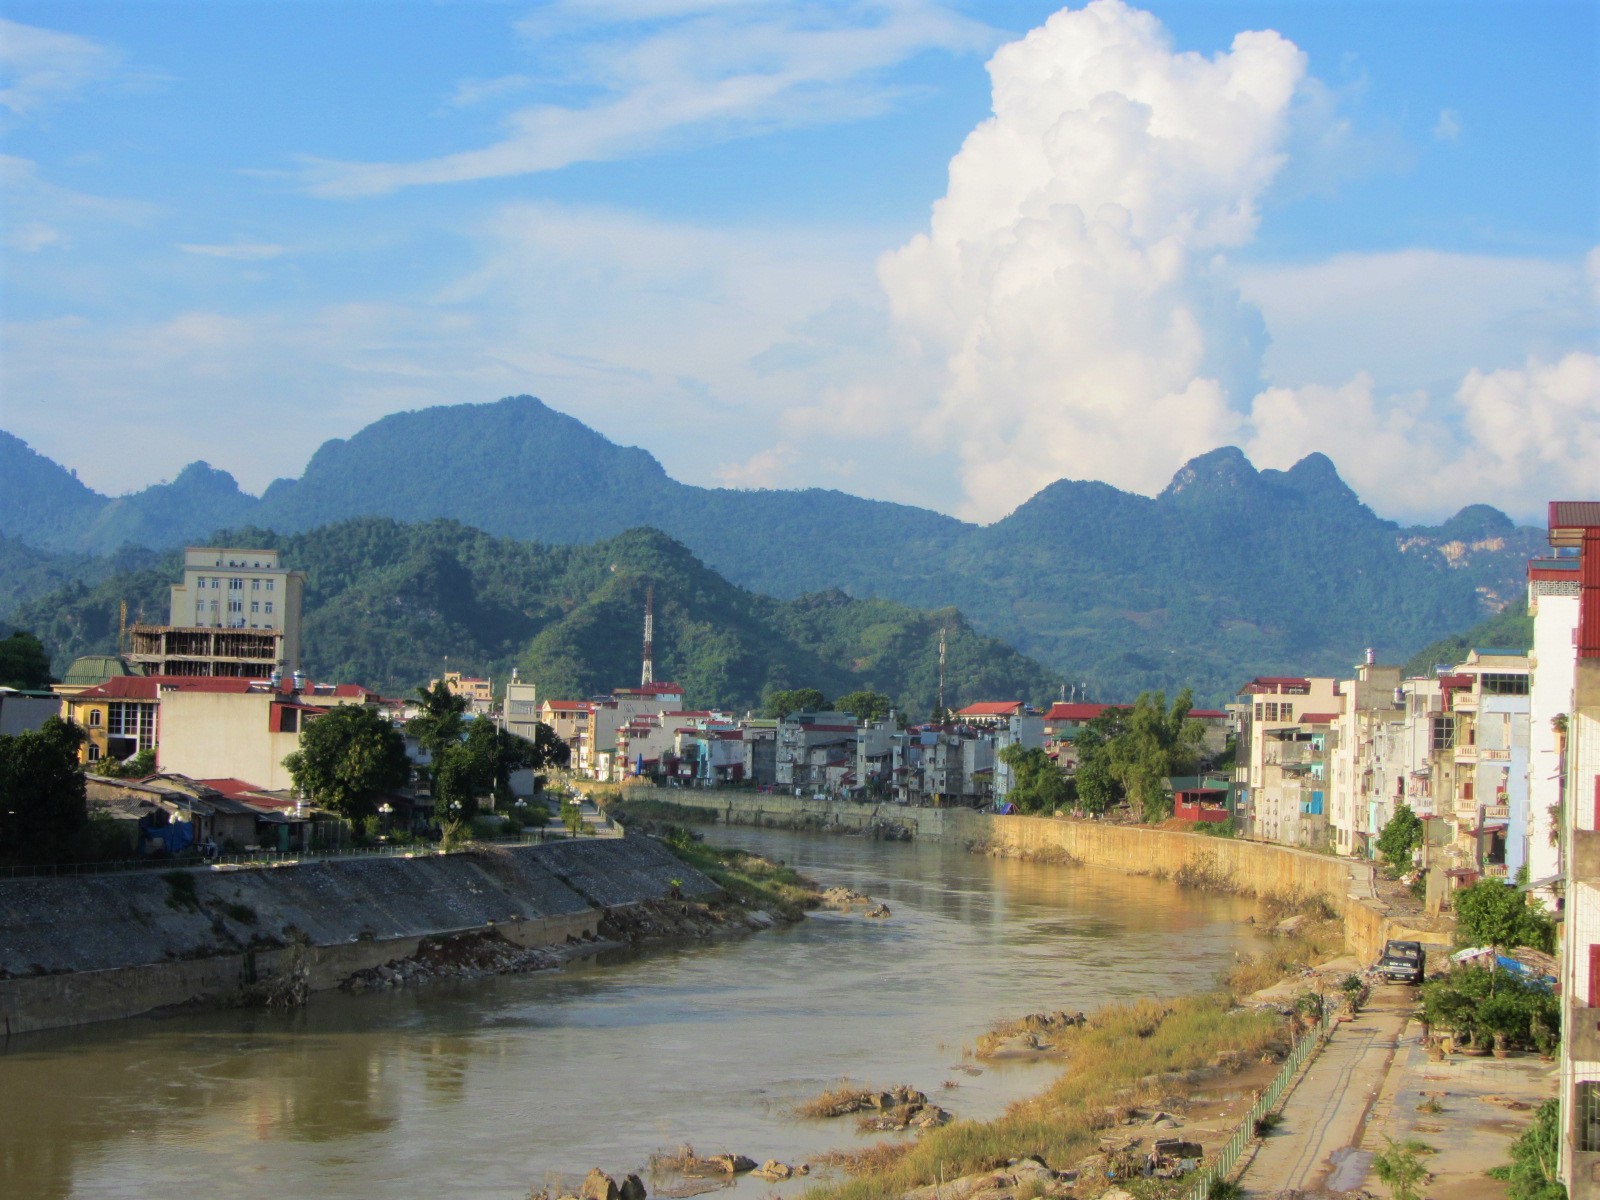 Ha Giang City on the Lo (Blue) River